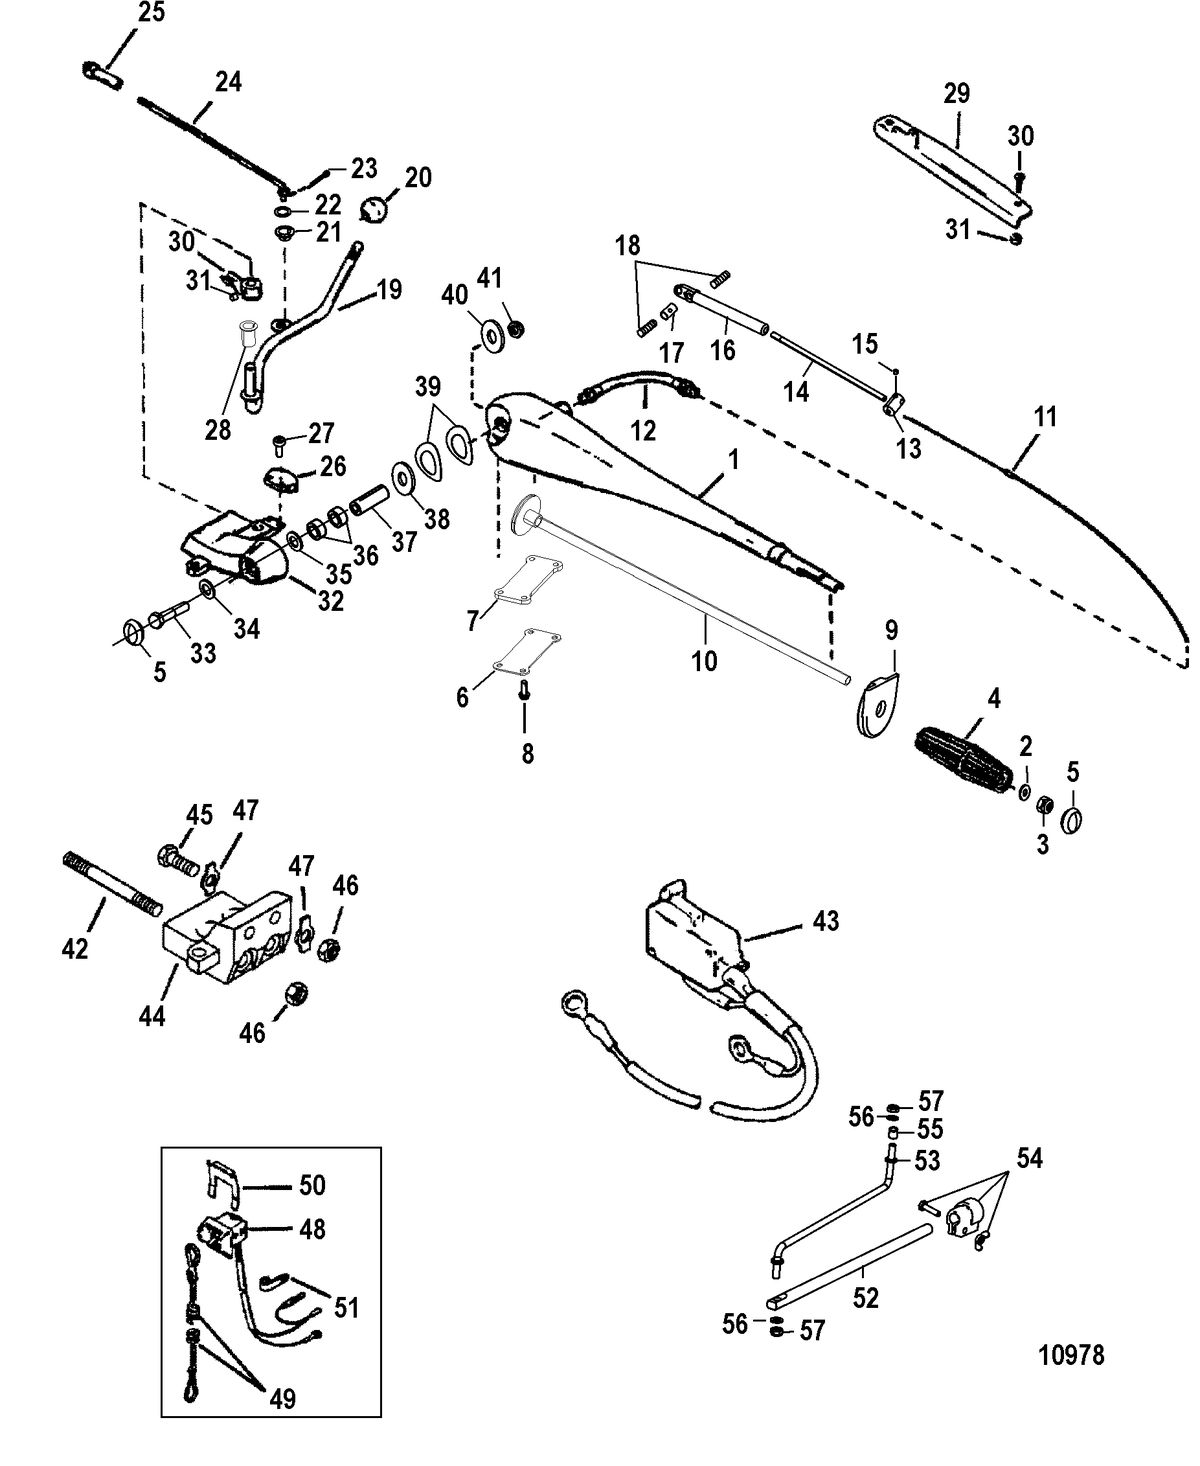 ACCESSORIES STEERING SYSTEMS AND COMPONENTS Tiller Handle Kit(78551A46 and 78551A47)